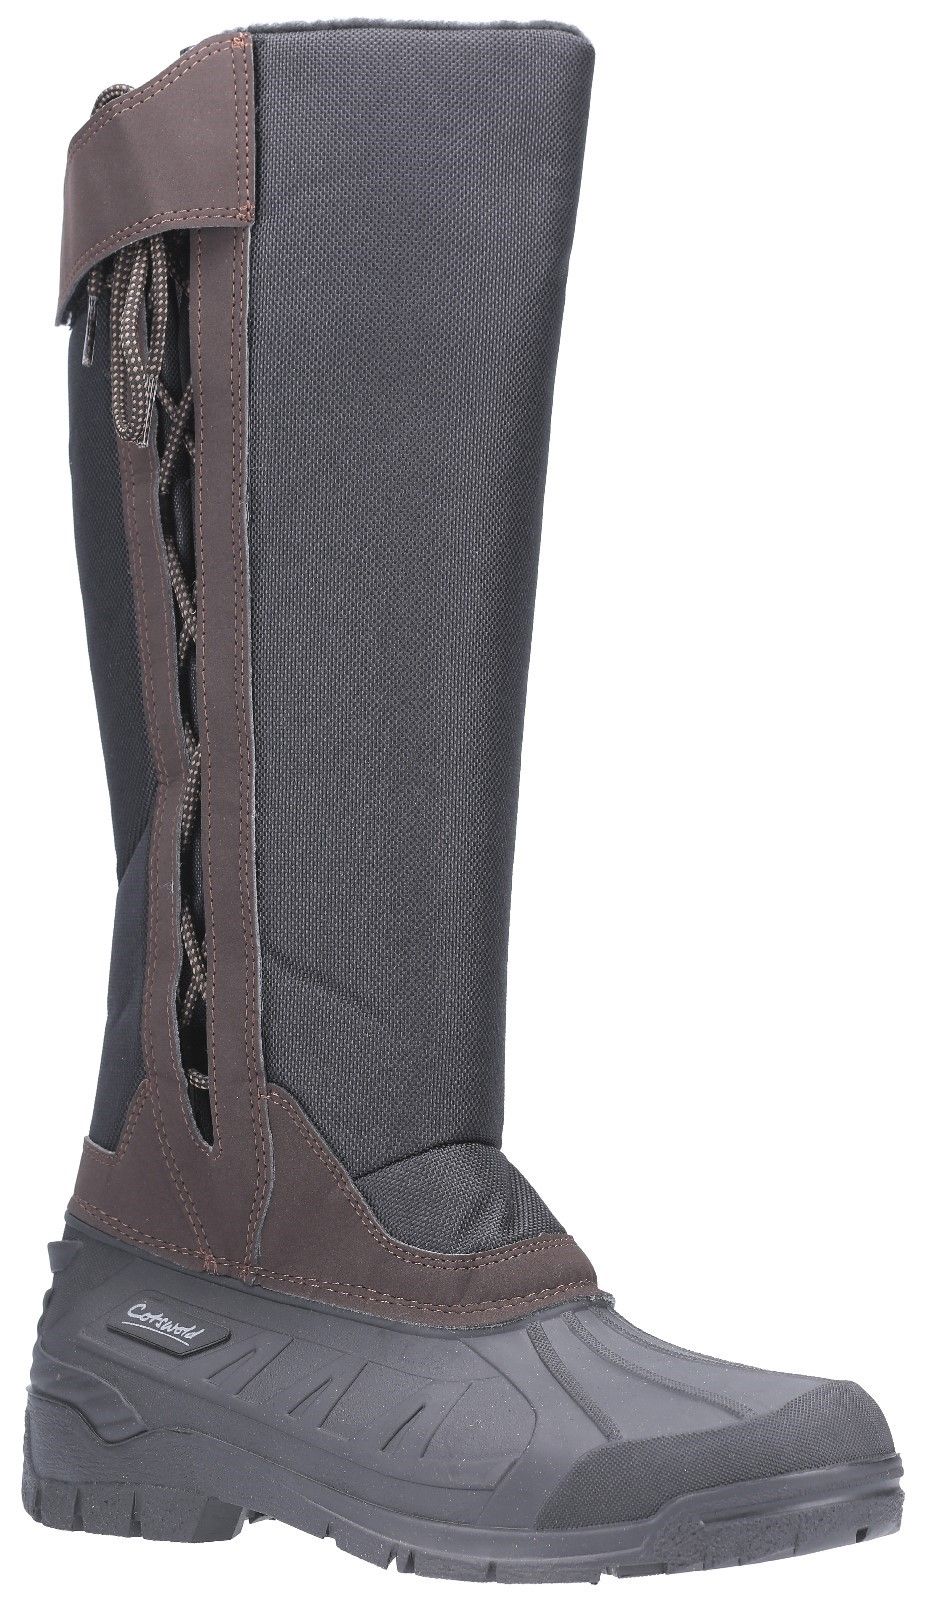 Inspired by the hidden tracks and unpredictable weather of the Cotswolds, these hybrid weather boots combine a completely waterproof rubber sole and foot section and warming hi-leg upper for real practical comfort.Hybrid weather boot designed for the elements. 
Waterproof rubber galosh. 
Luxury faux sheering microfiber fleece lining. 
Breathable synthetic mesh panels. 
High leg opening and warming gussets.